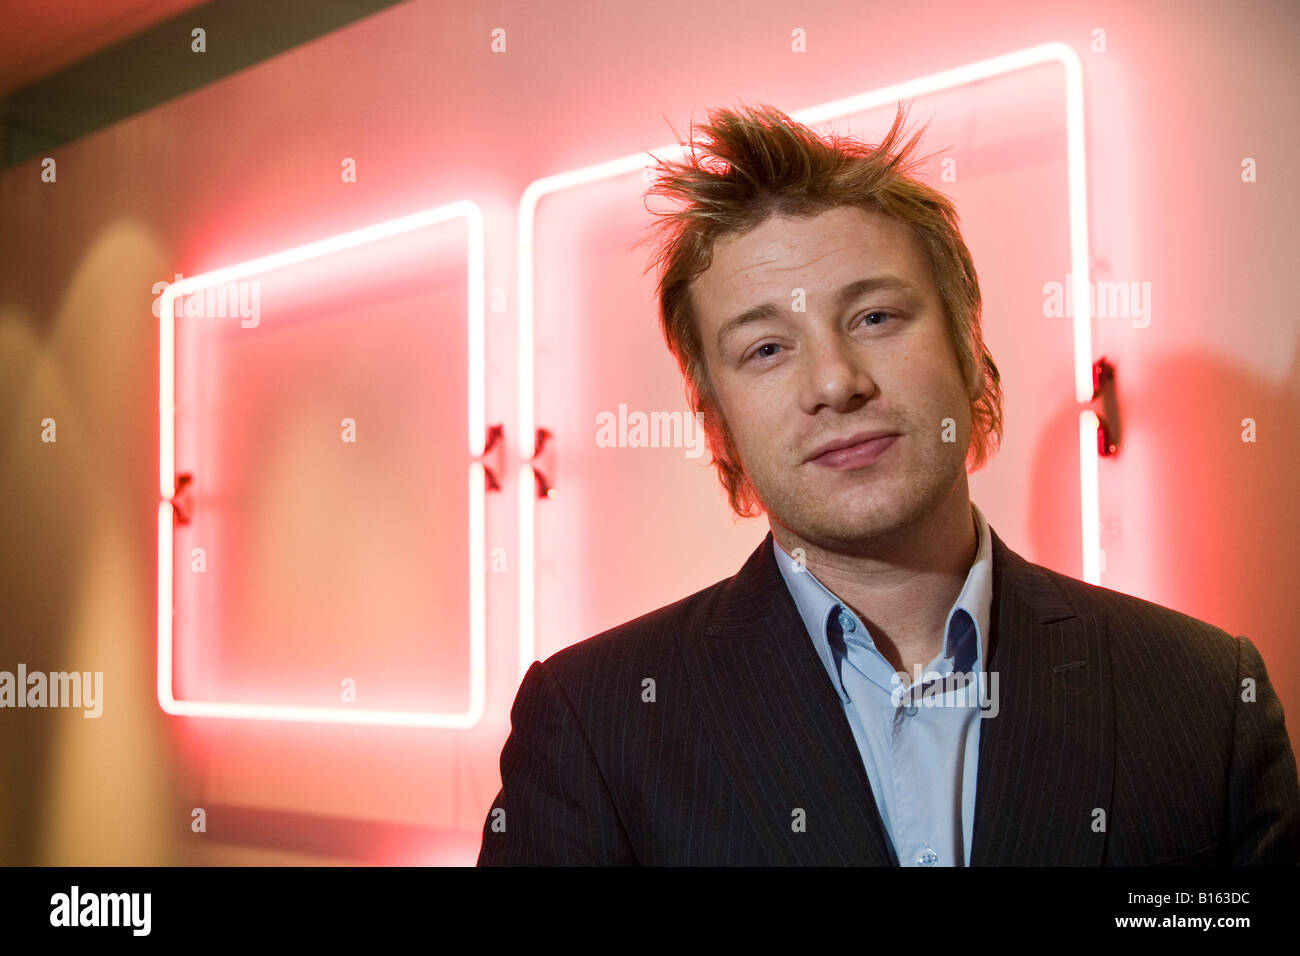 Jamie Oliver celebrity chef poses for his portrait in London Stock Photo